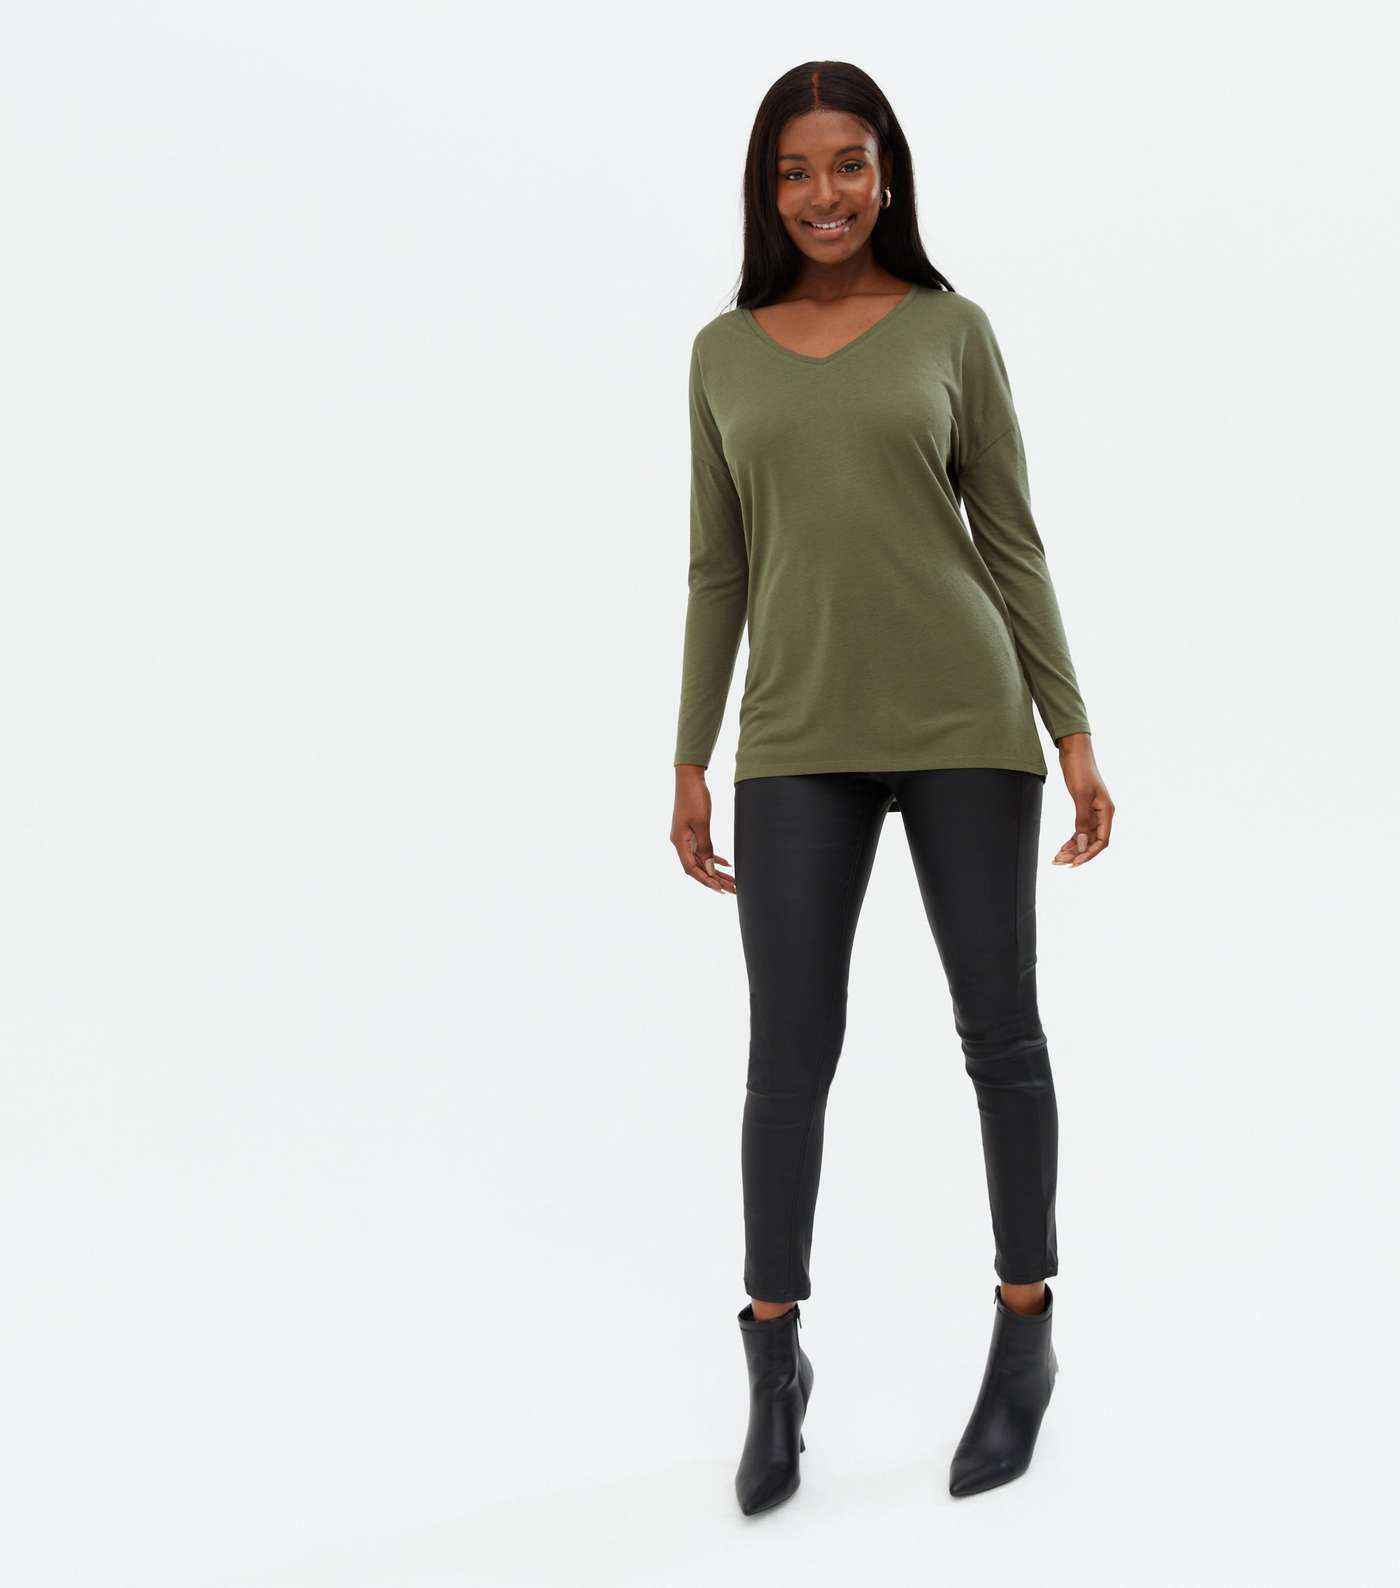 Khaki V Neck Relaxed Fit Long Top Image 2